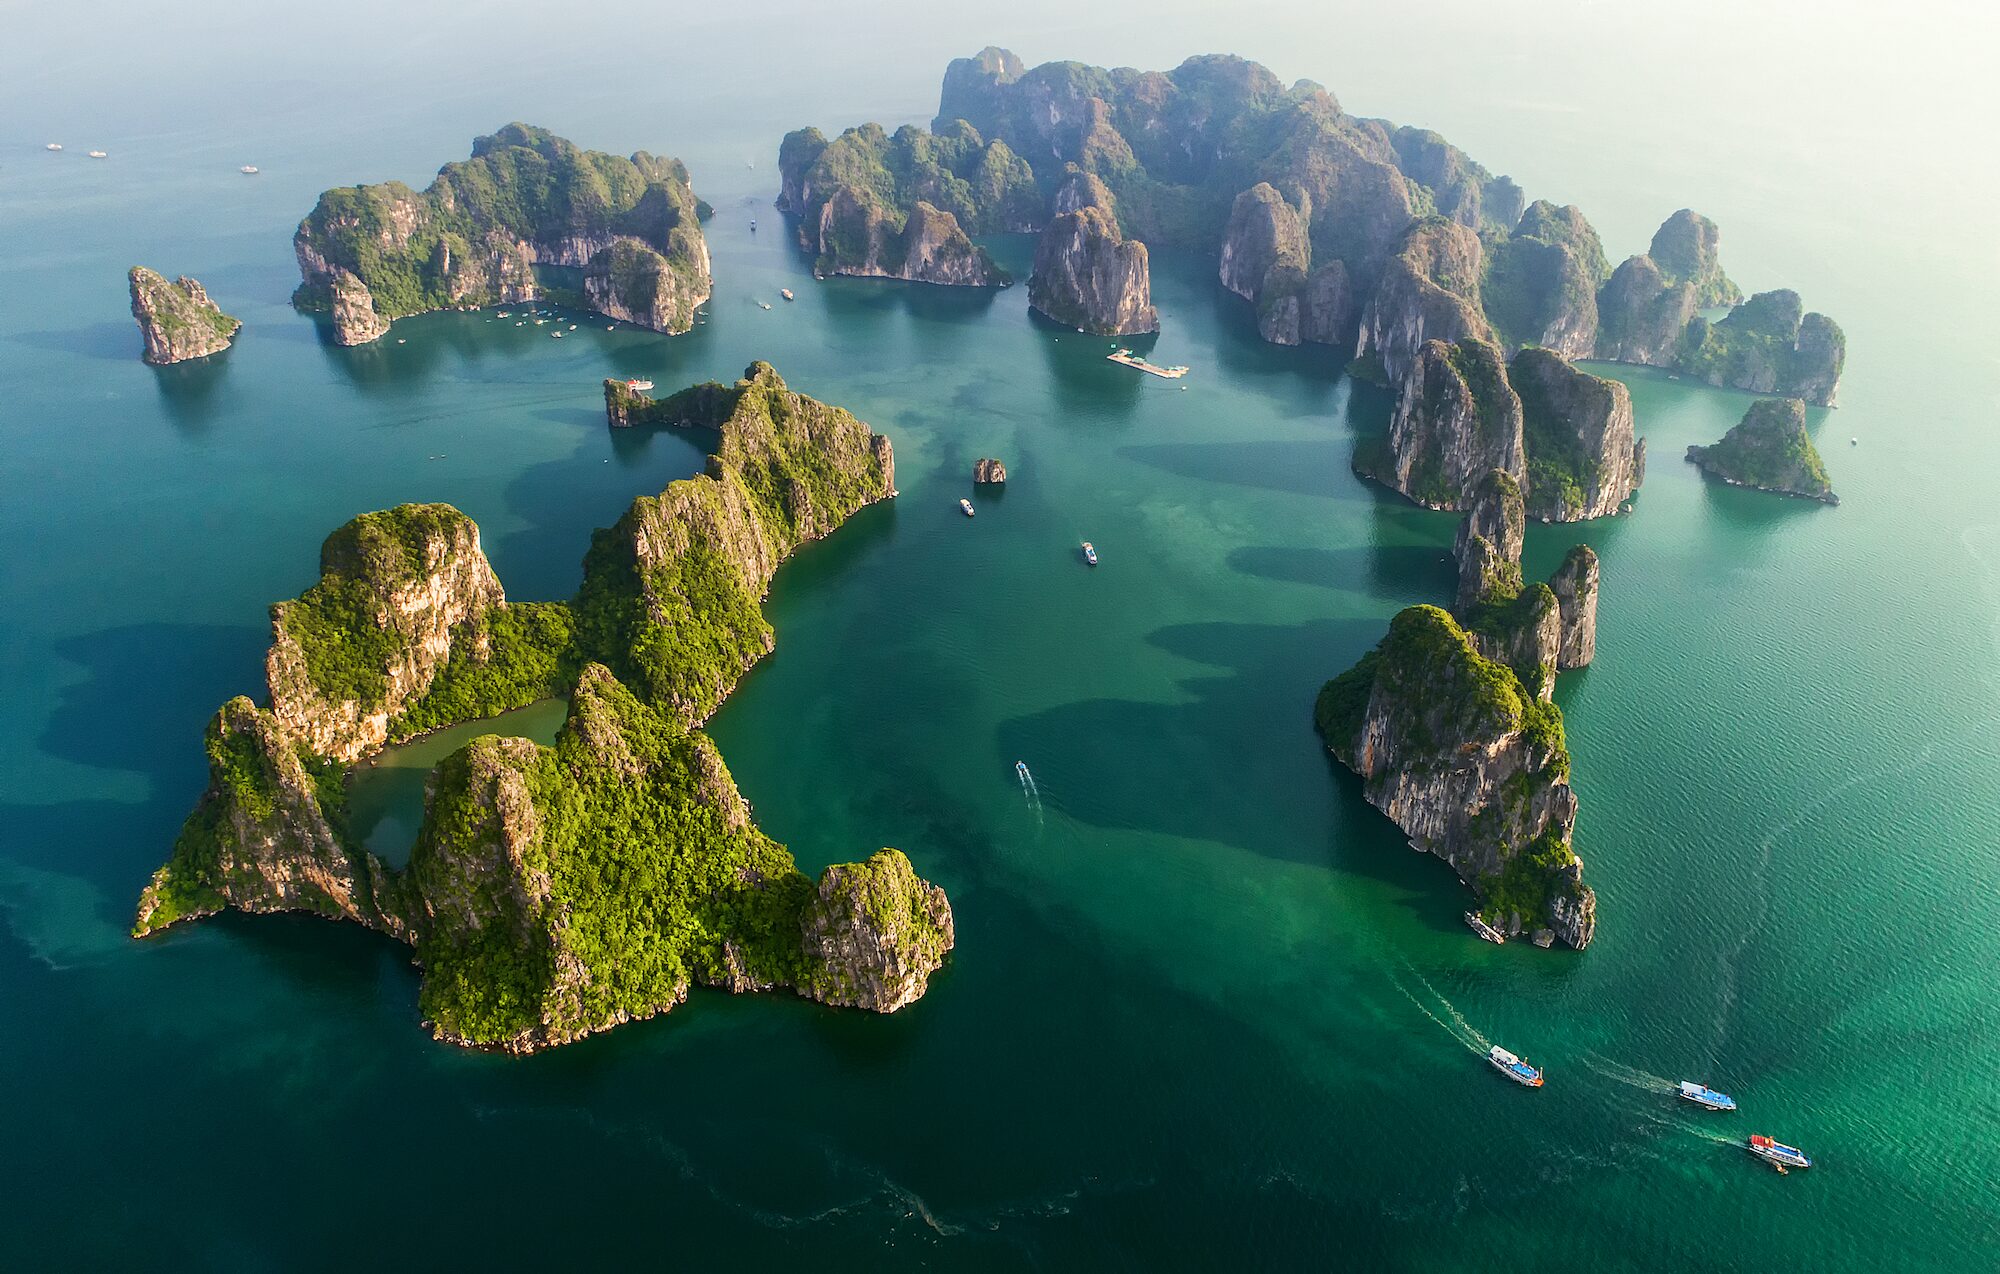 best places to visit southeast asia in january